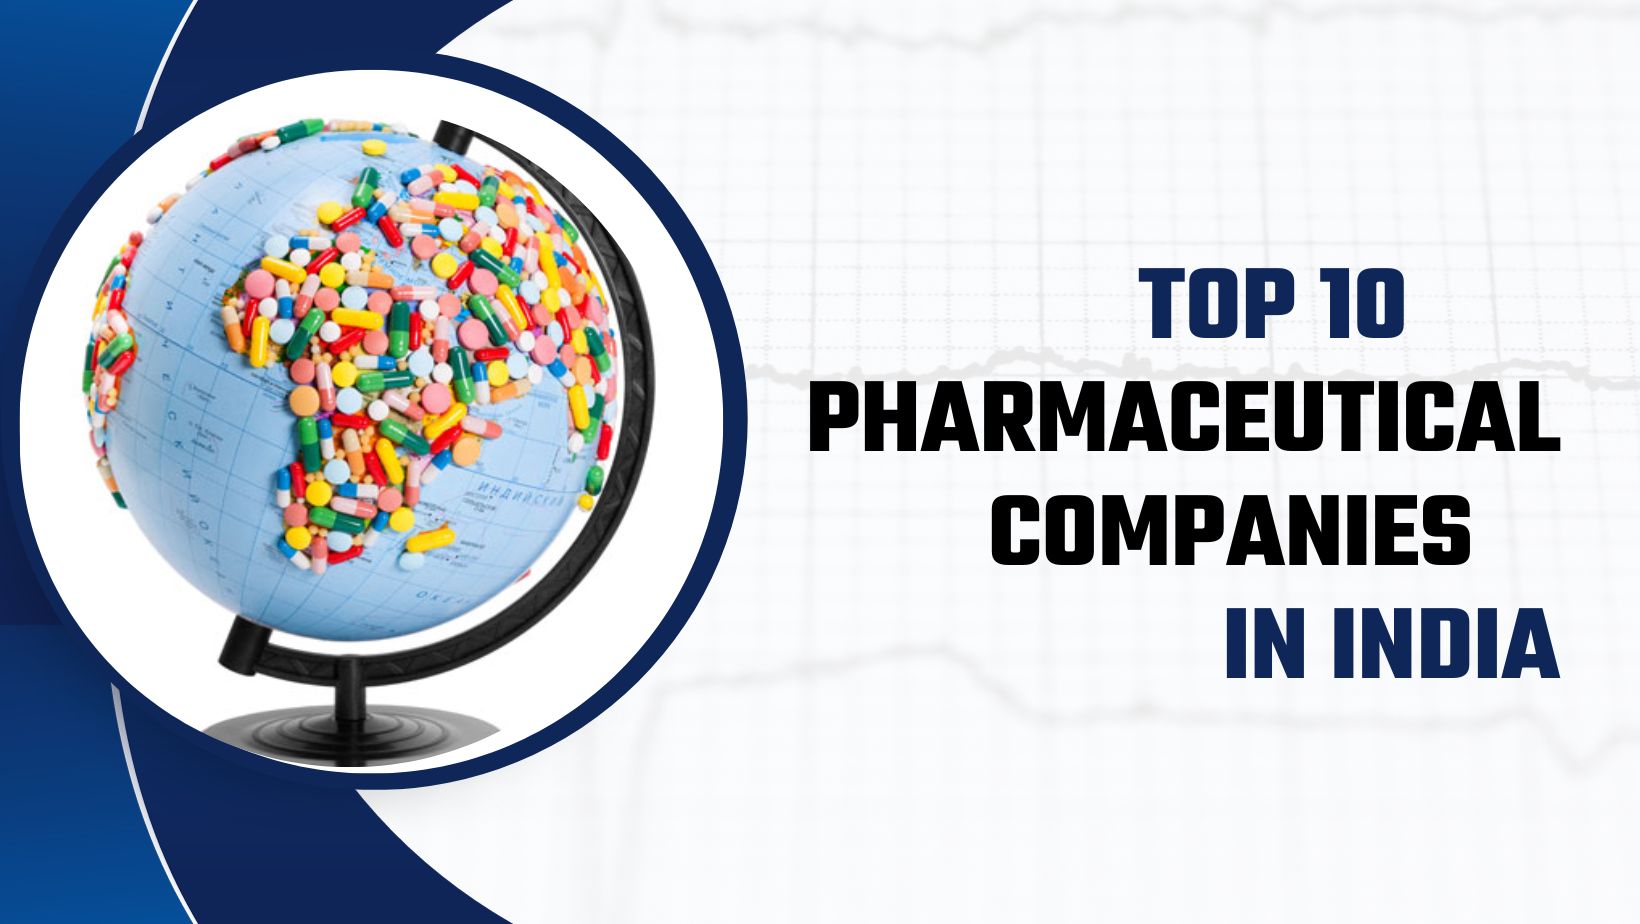 Top 10 Pharmaceutical Companies in India